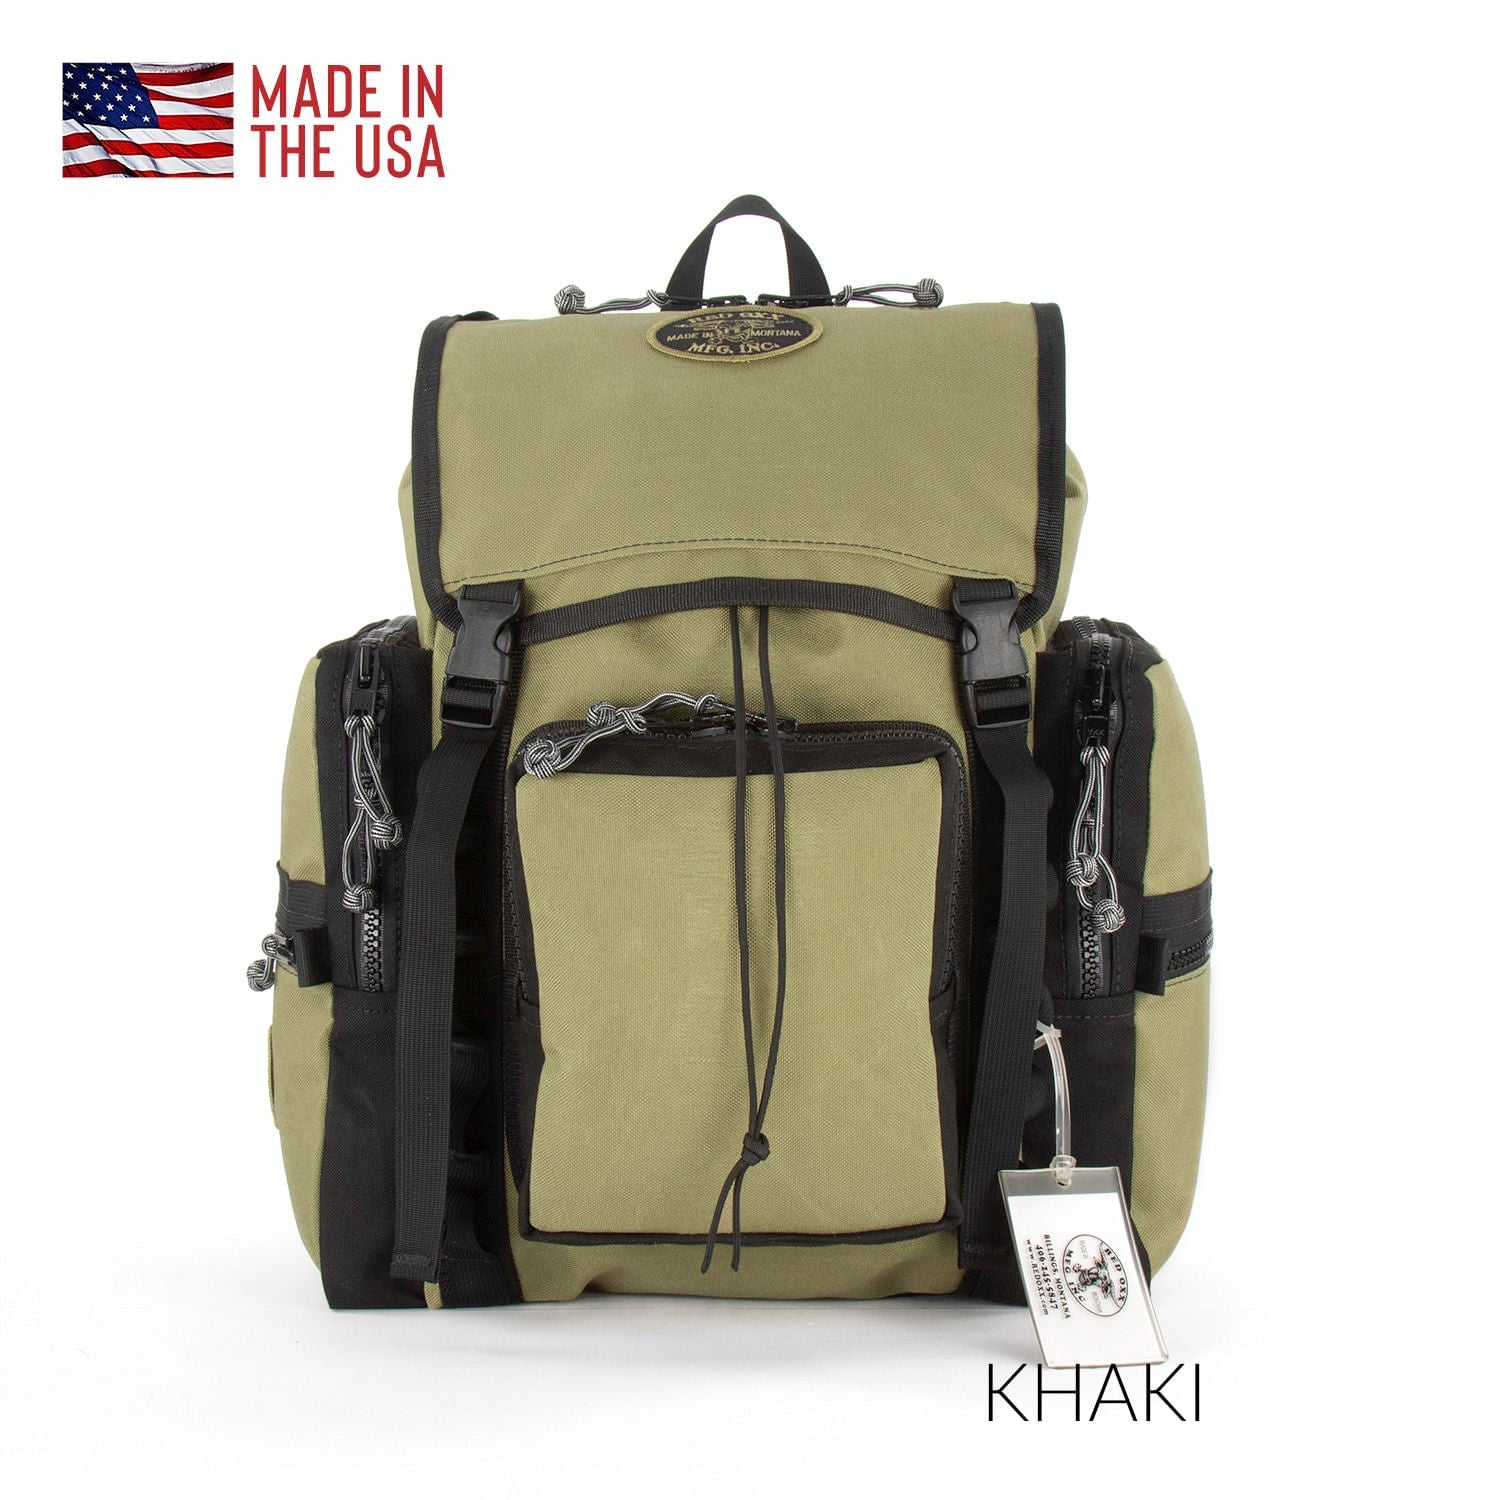 C Ruck in Khaki maximum carry on sized backpack. 